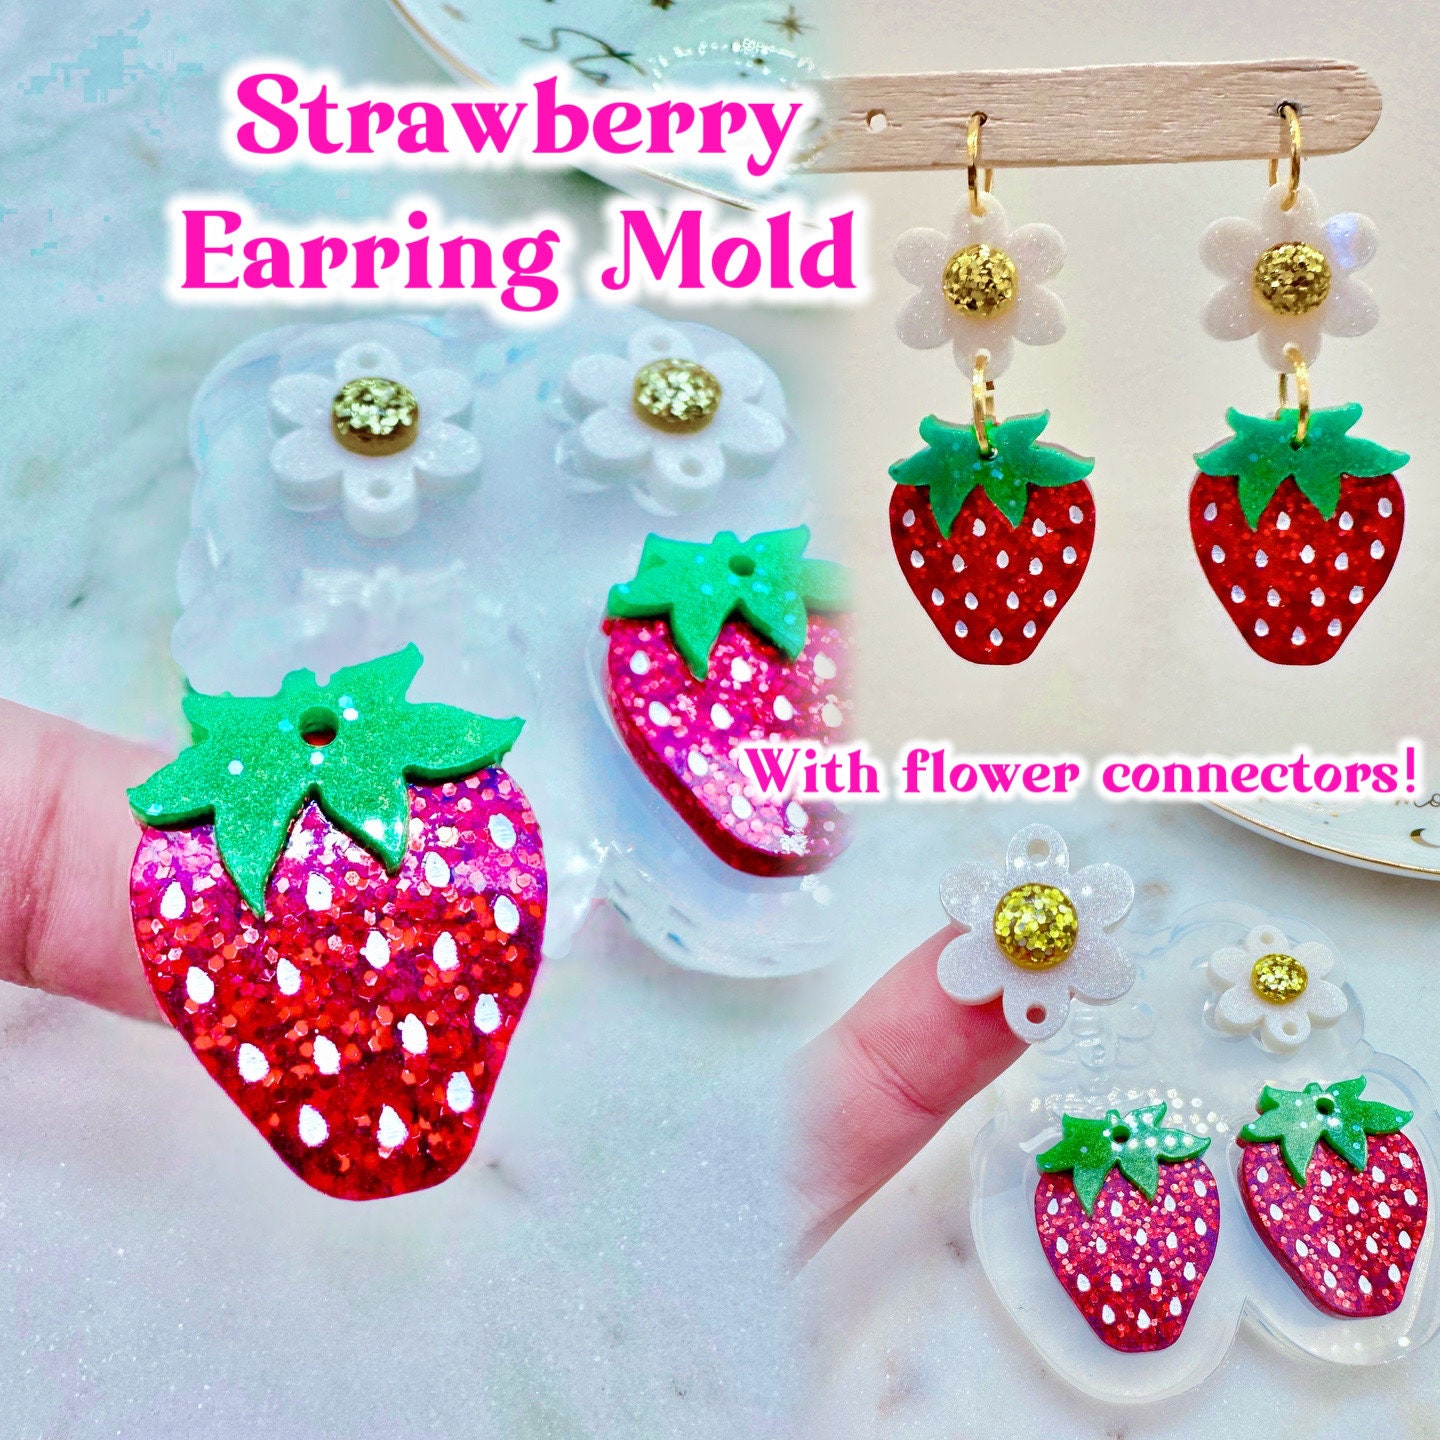 3D Strawberries Silicone Molds 13 Cavities Soap Molds Strawberry